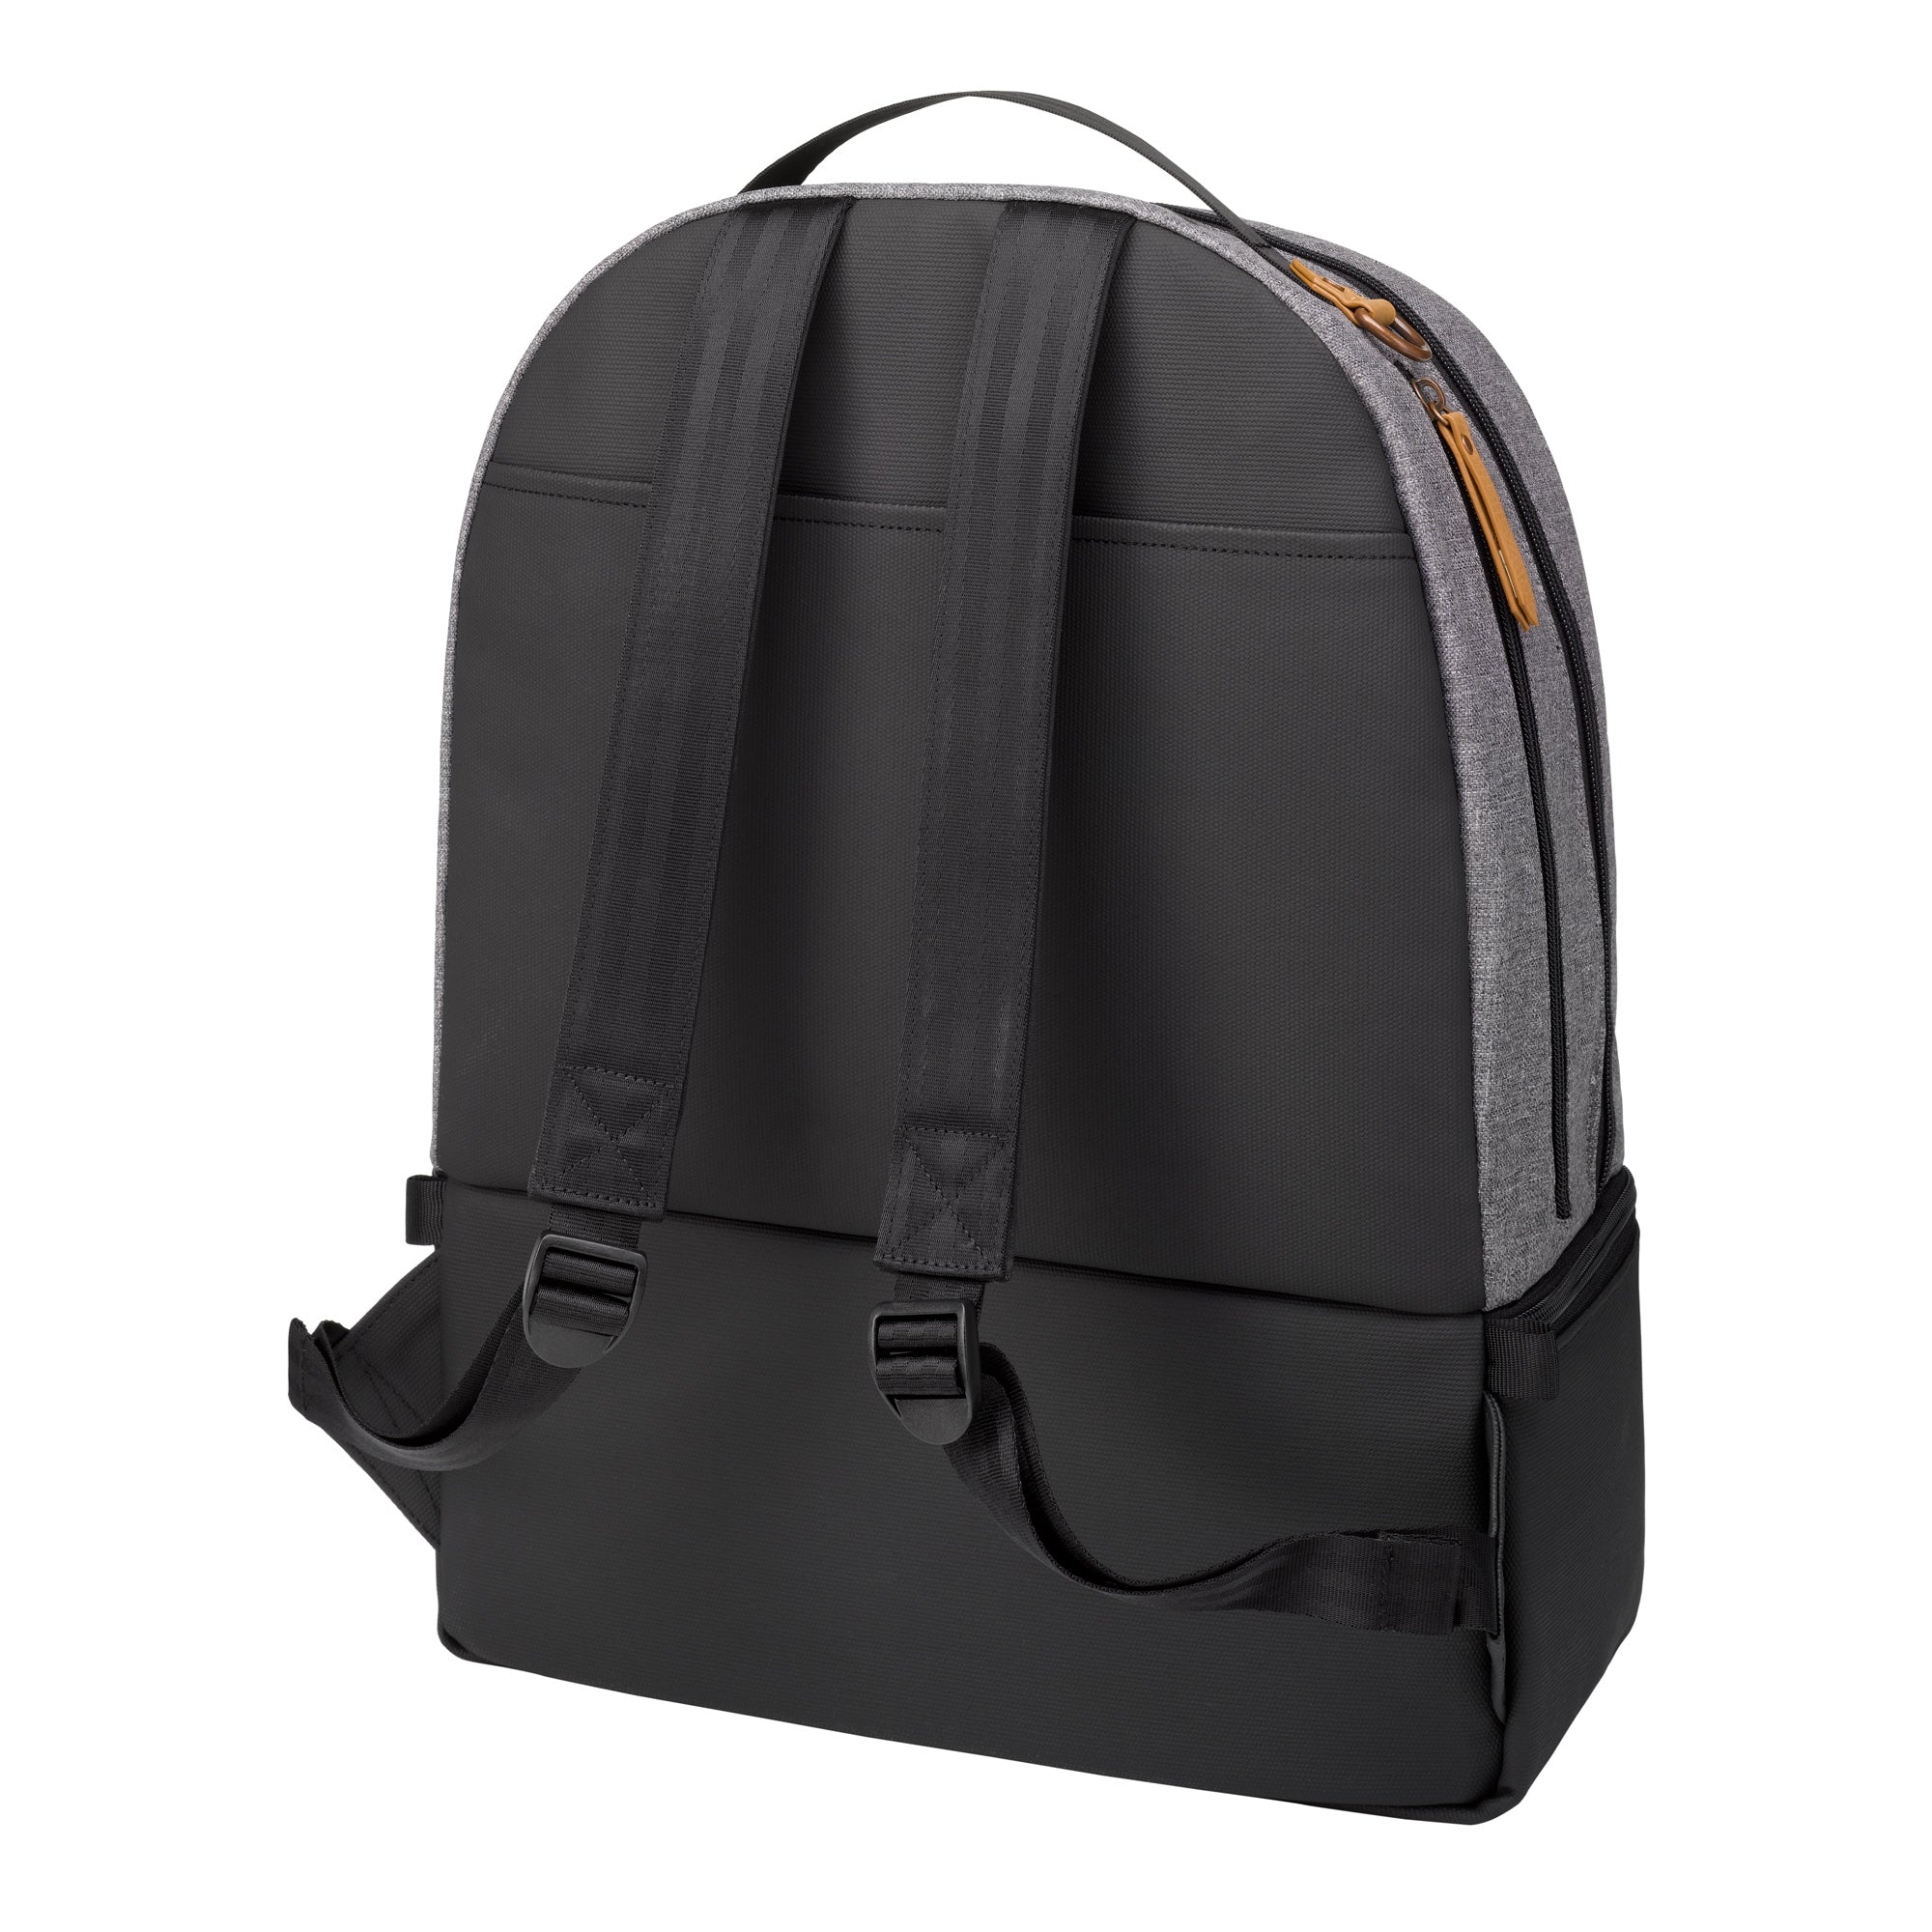 Petunia Pickle Bottom Axis Backpack in Graphite/Camel